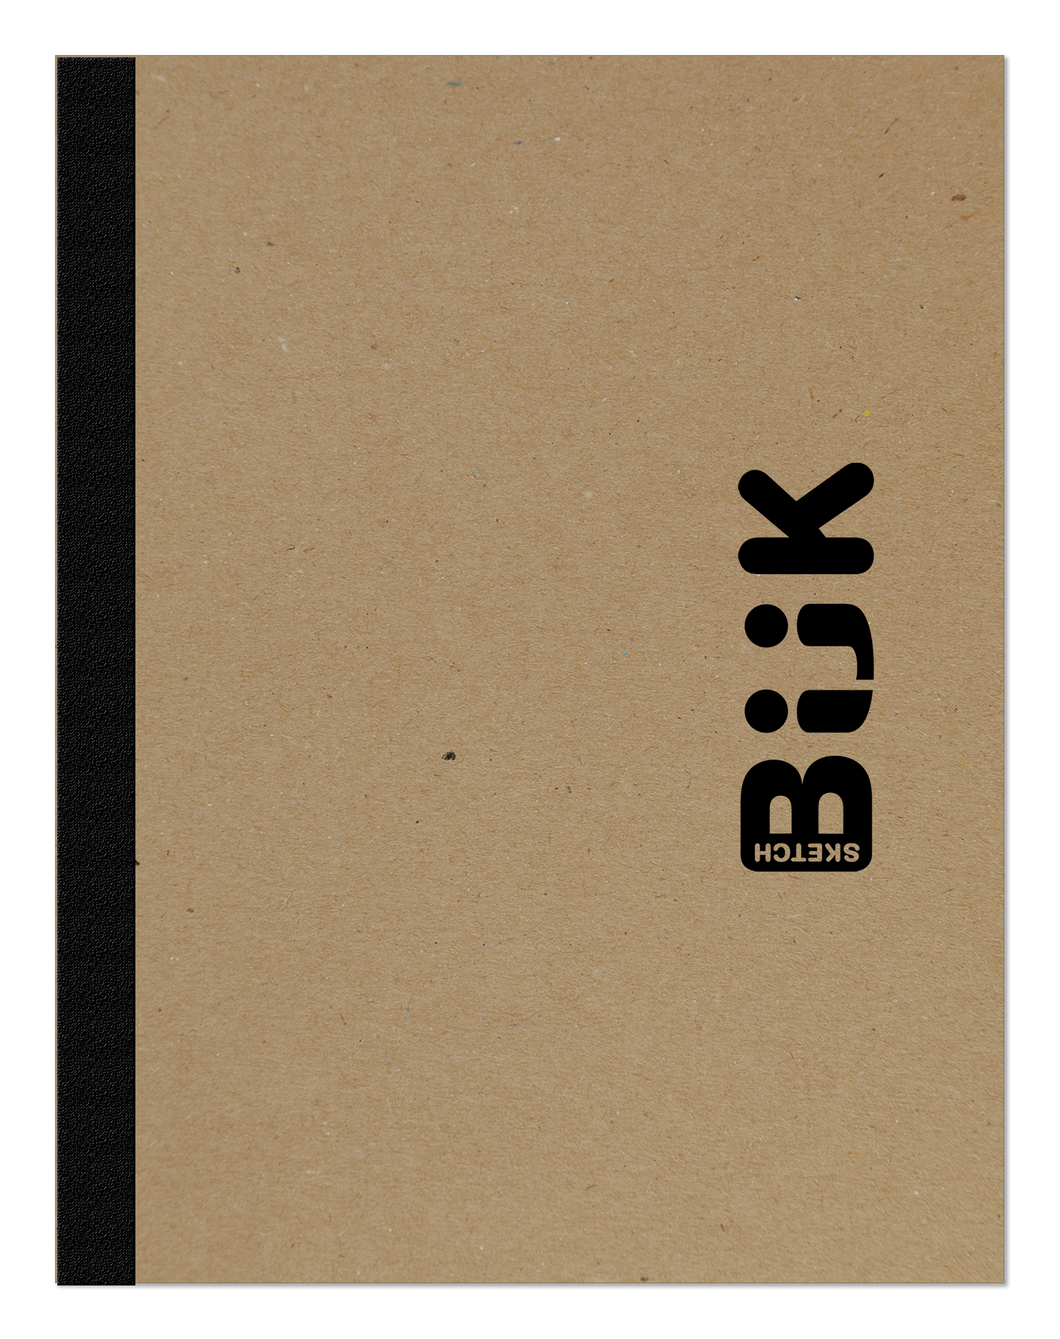 LAY FLAT sketchbook. BUK brand removable sheet, journal style sketch book for pencil, ink, marker, charcoal and watercolor paints. (8.5